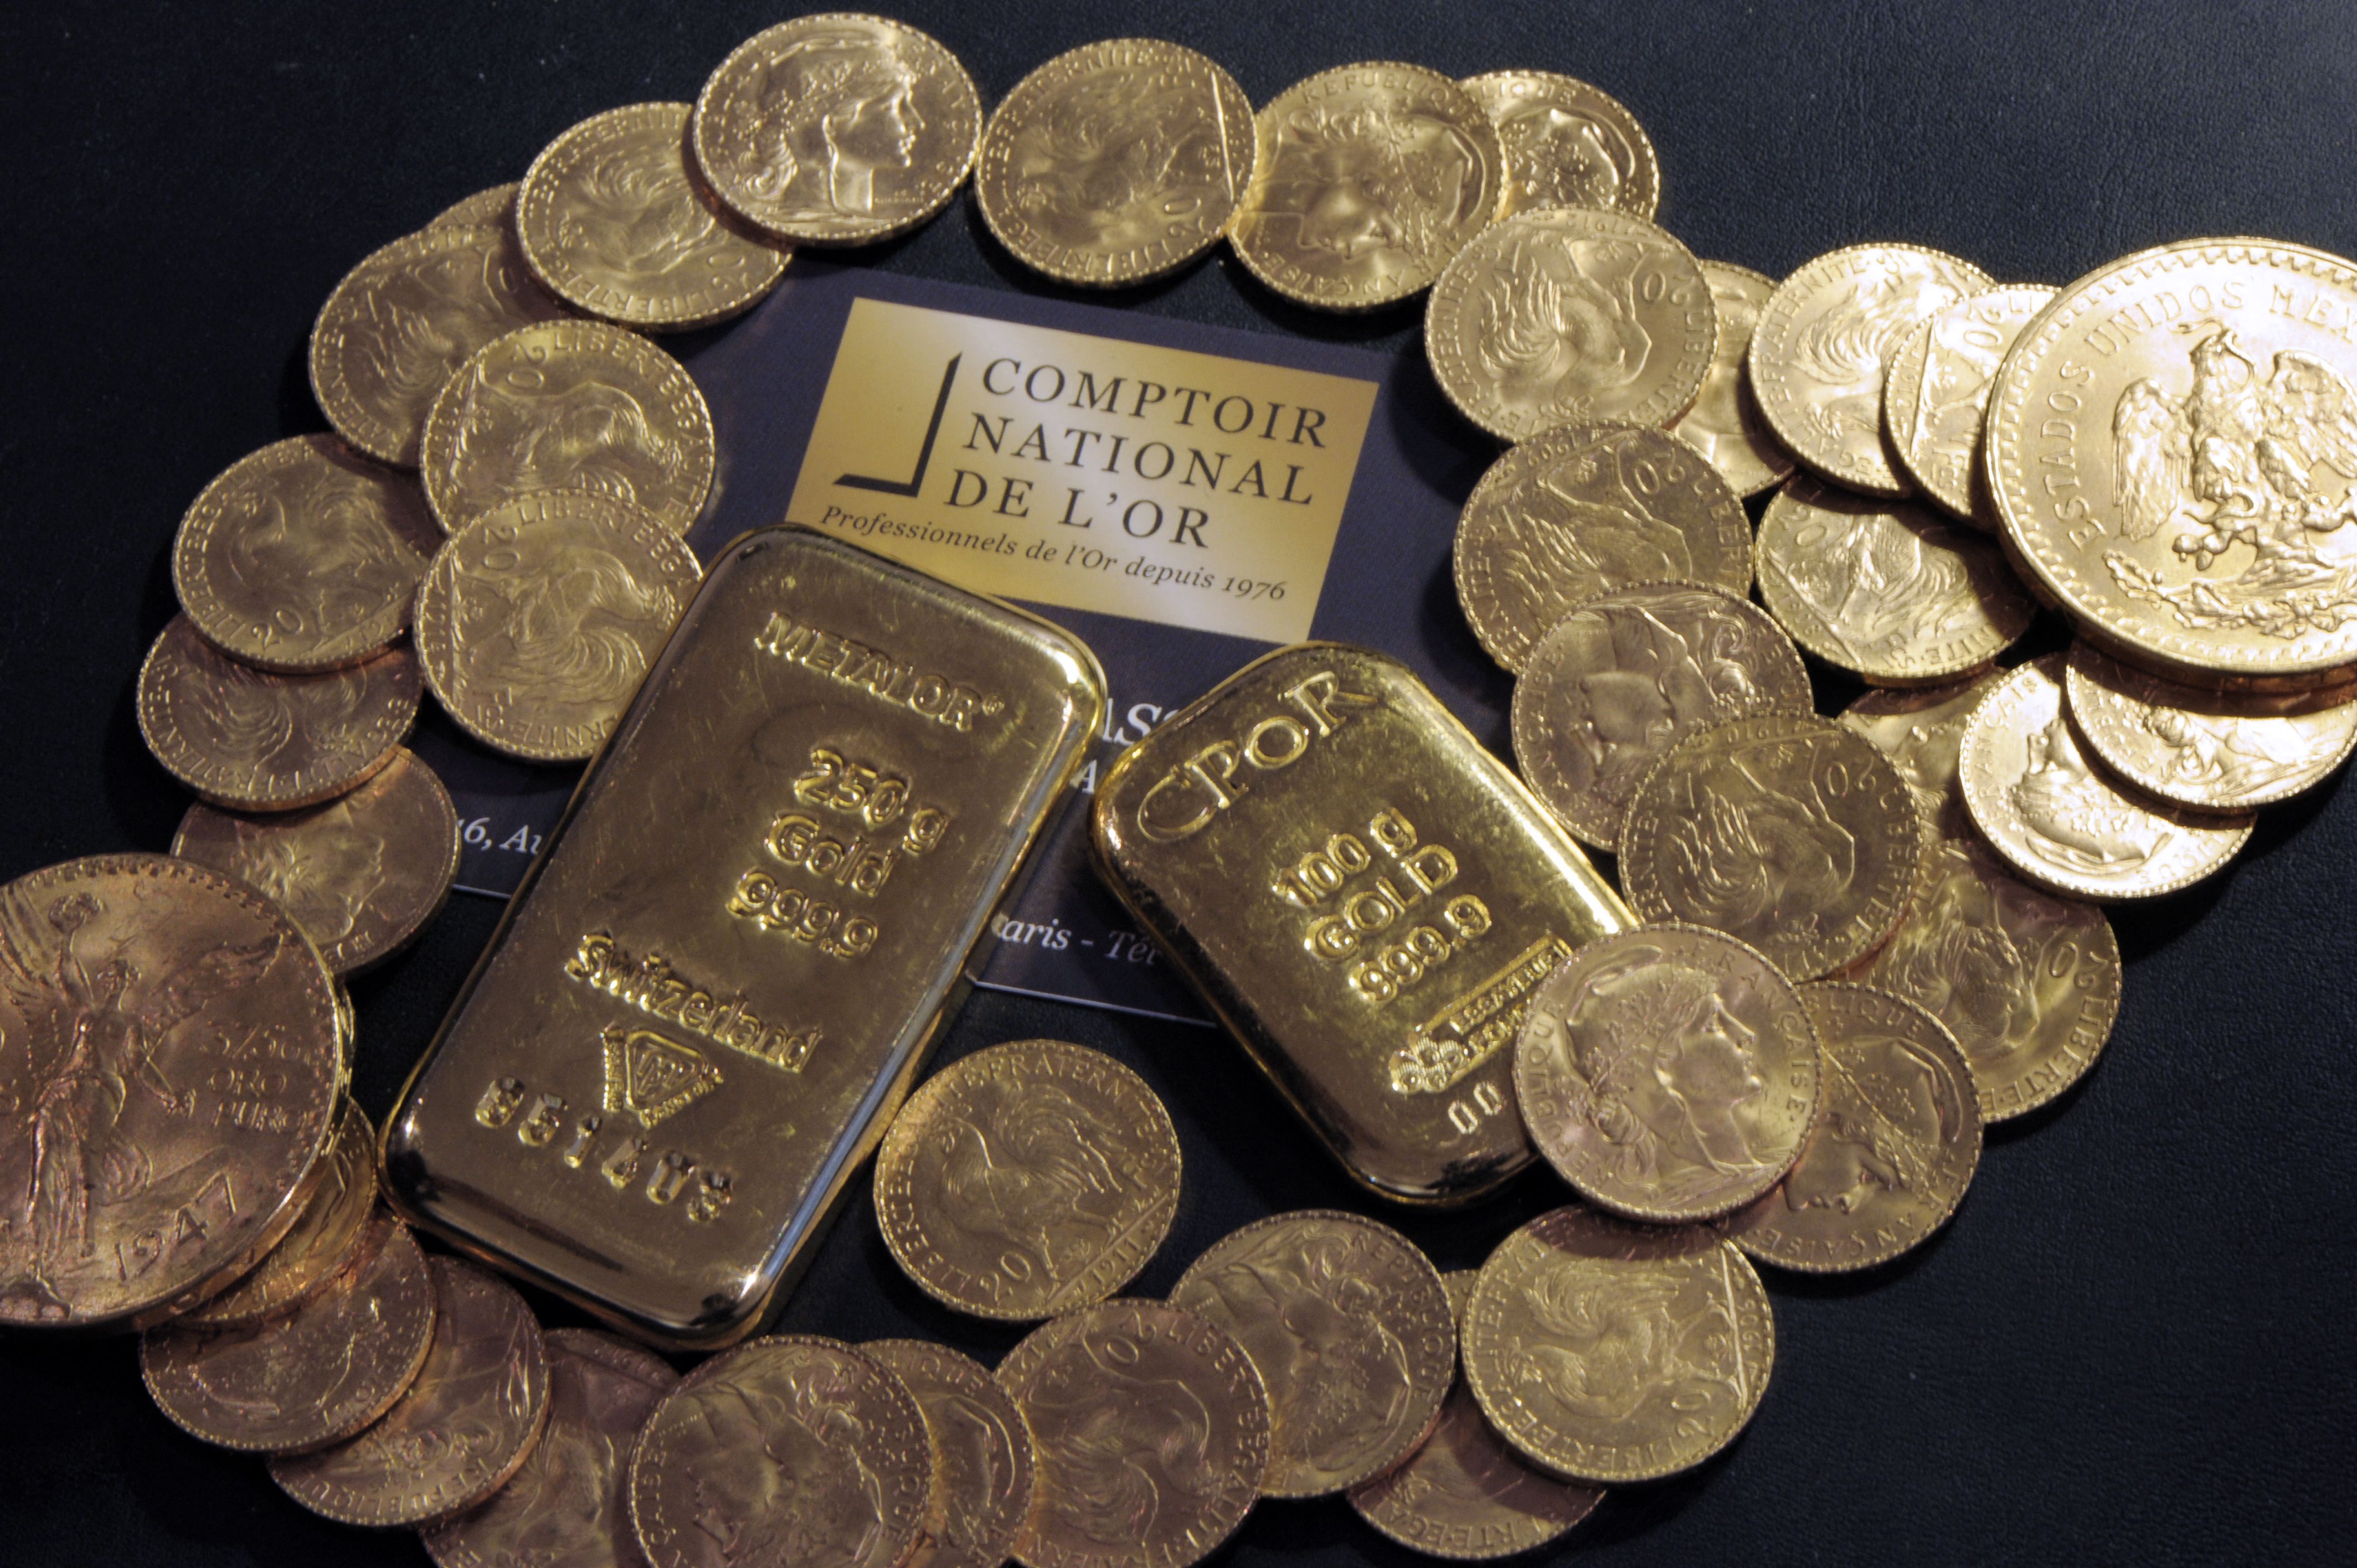 Photo of gold bars and coins displayed on a table at the Comptoir National de l'Or, a shop that buys, sales and estimates gold and jewellery on October 5, 2012 in Paris. | Source: Getty Images/BERTRAND GUAY/AFP